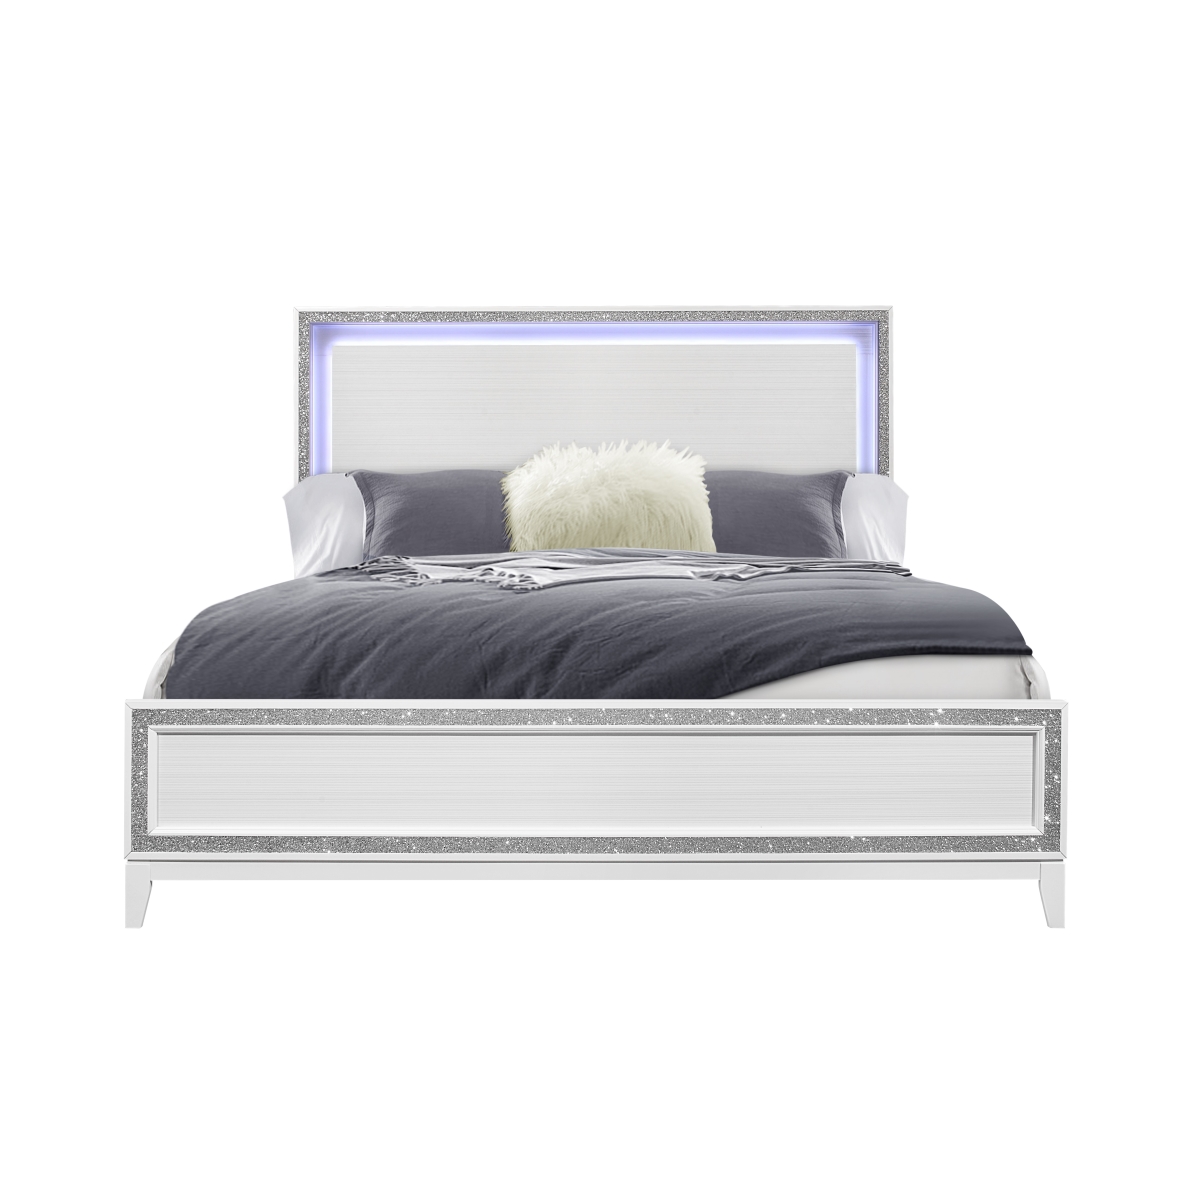 LILY-WHITE-KB Lily White King Size Bed -  Global Furniture USA